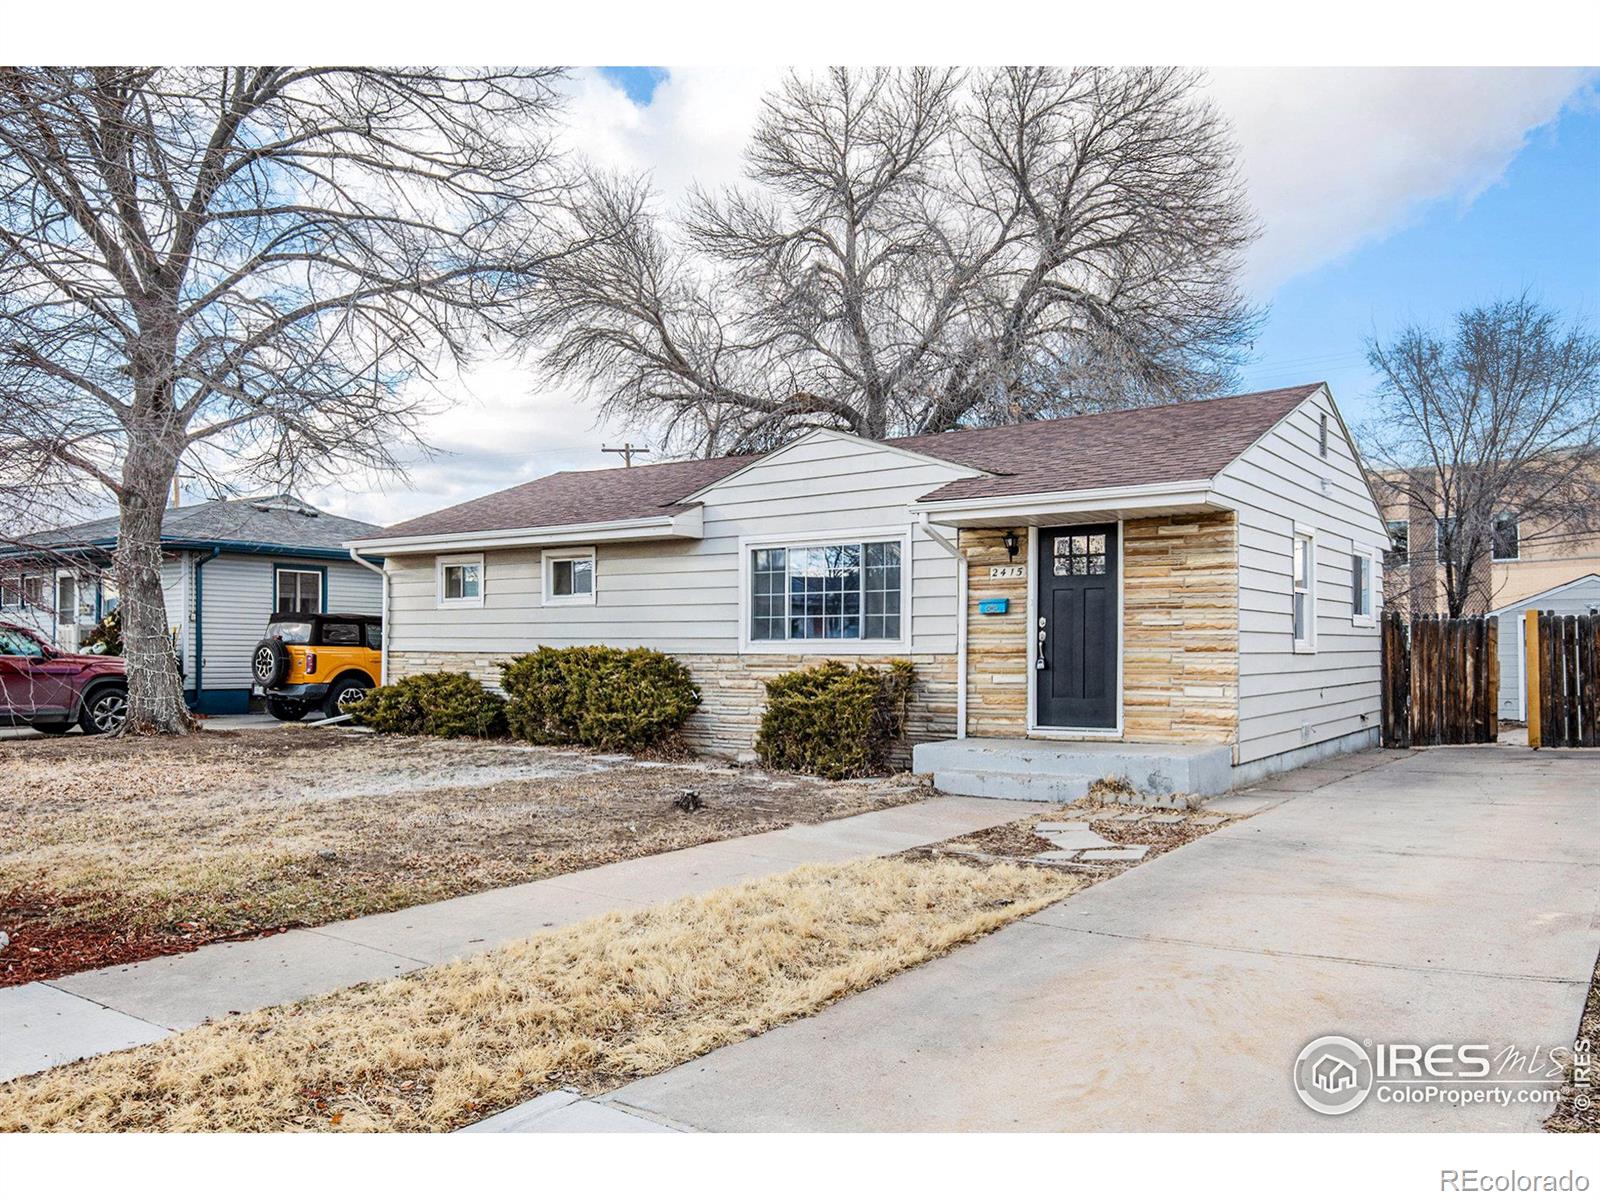 2415 w 6th street, greeley sold home. Closed on 2024-03-15 for $327,900.